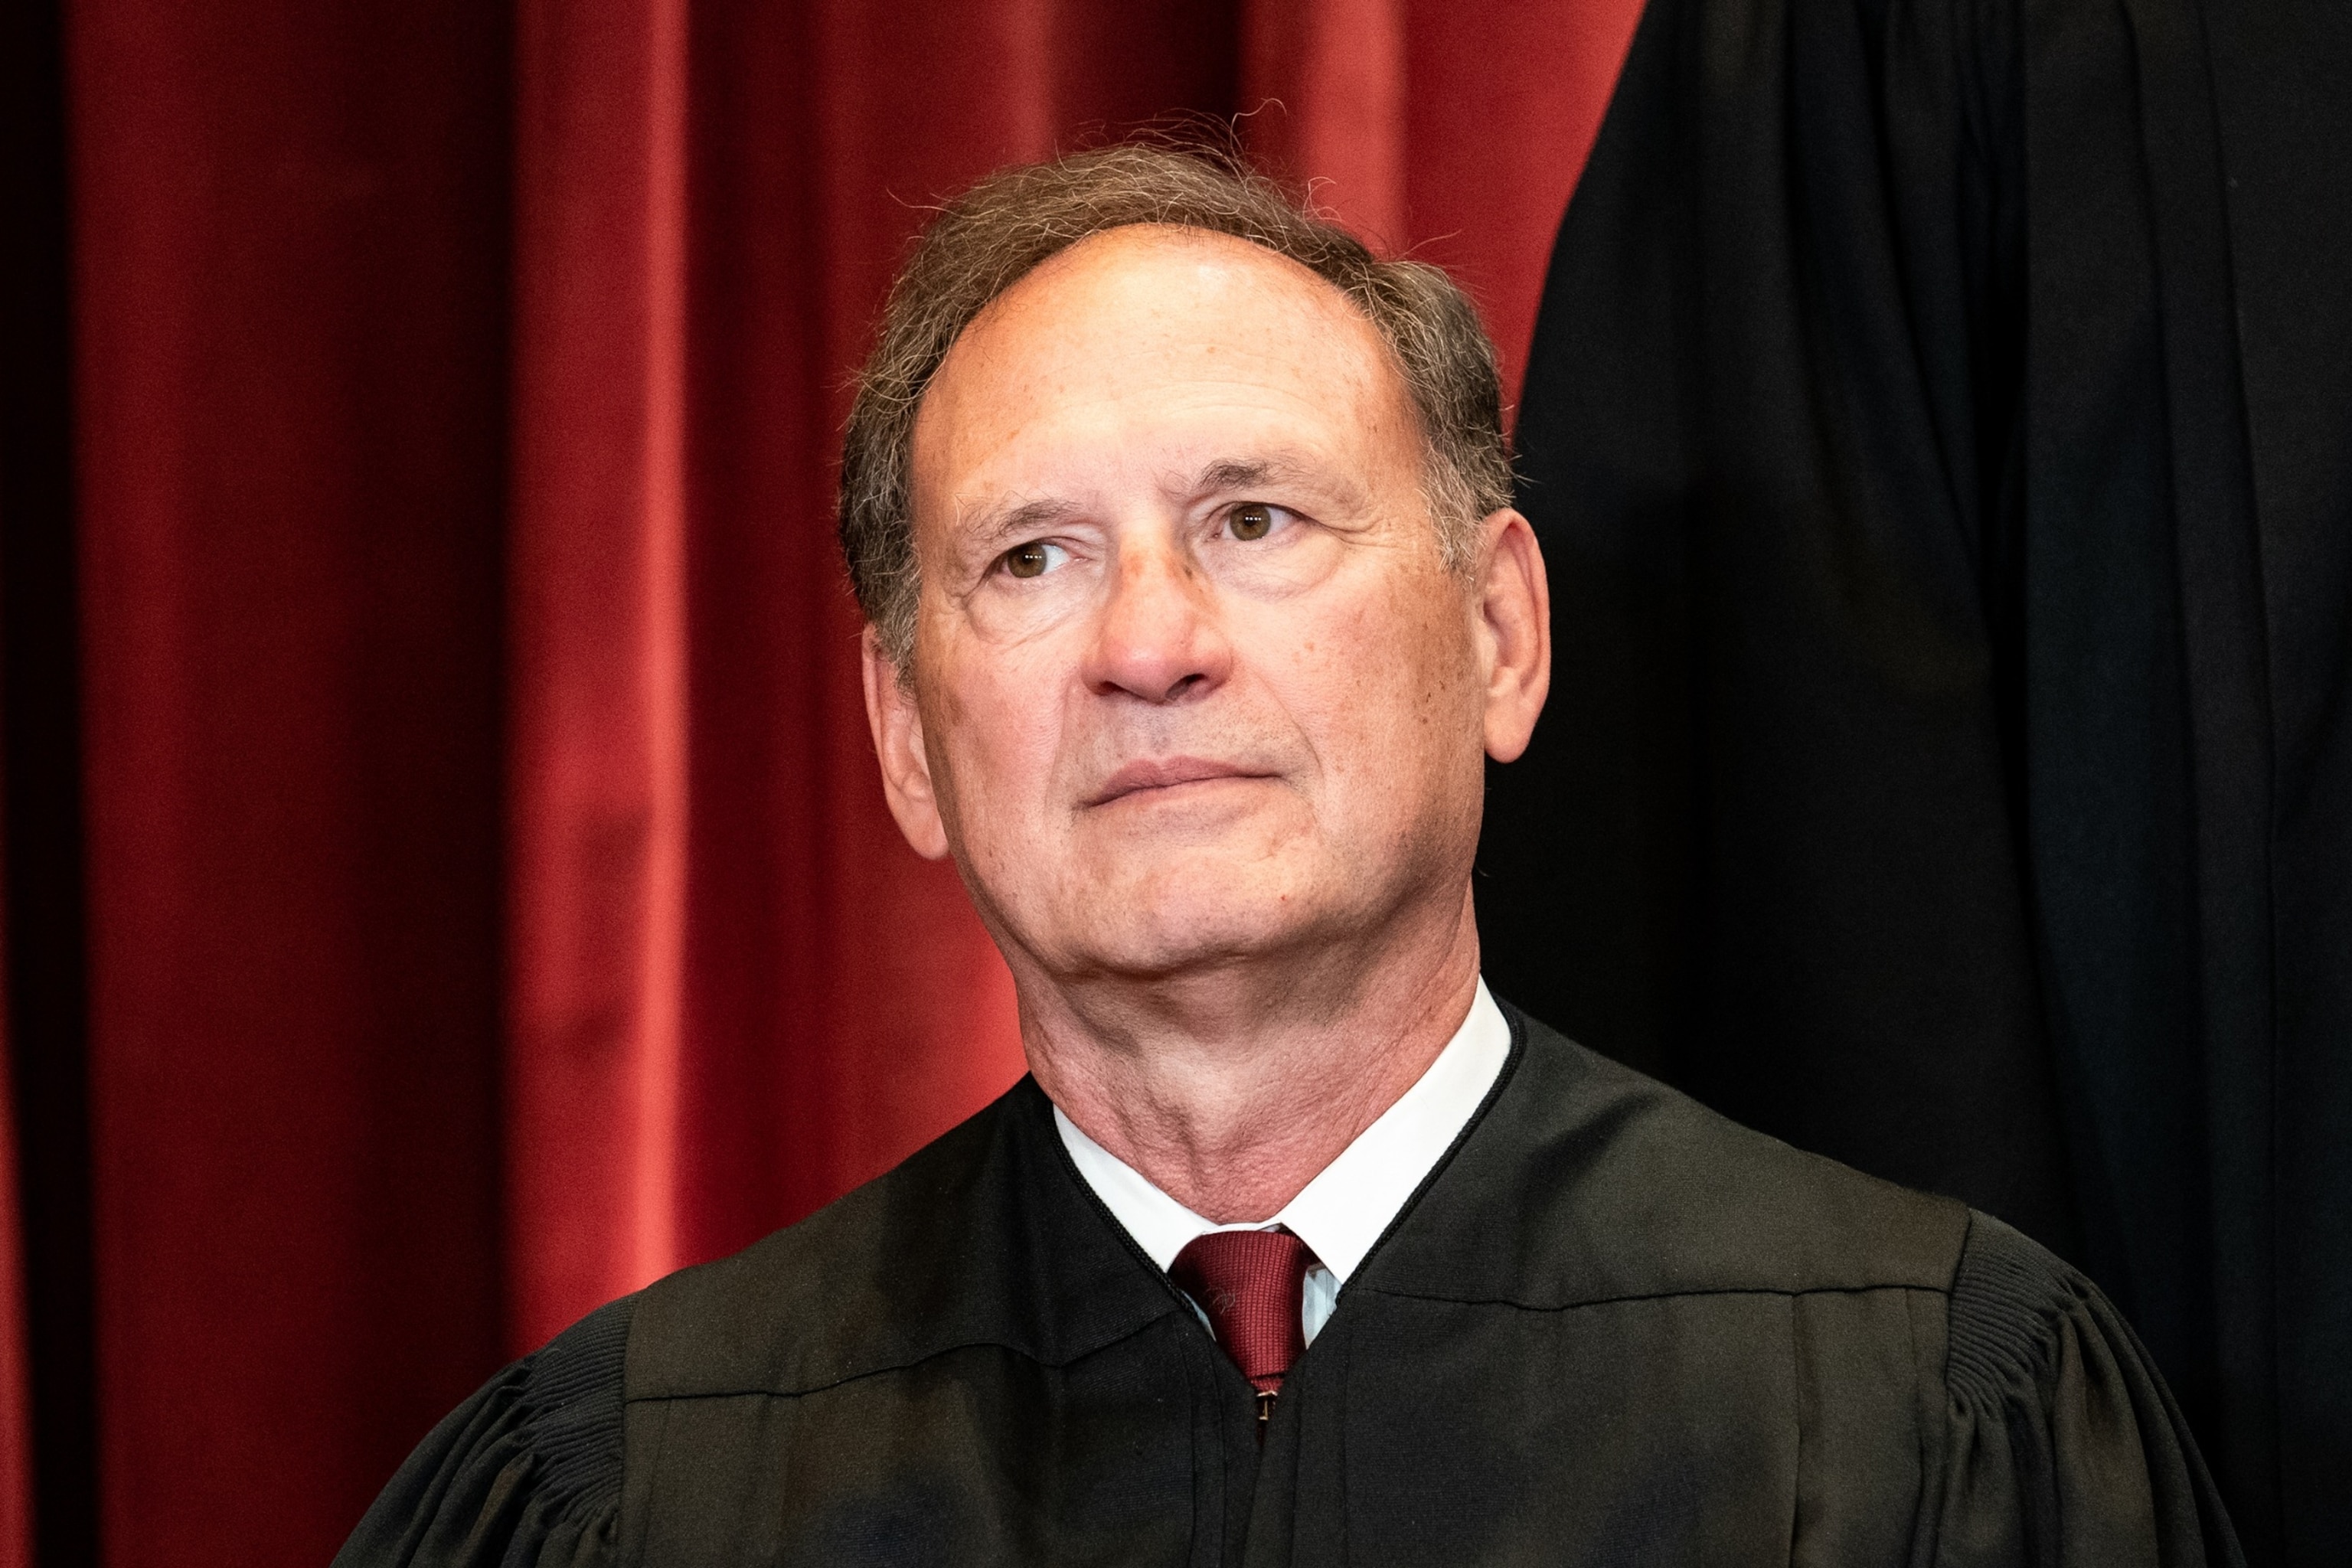 PHOTO: In this April 23, 2021, file photo, associate Justice Samuel Alito sits during a group photo of the Justices at the Supreme Court in Washington, D.C.